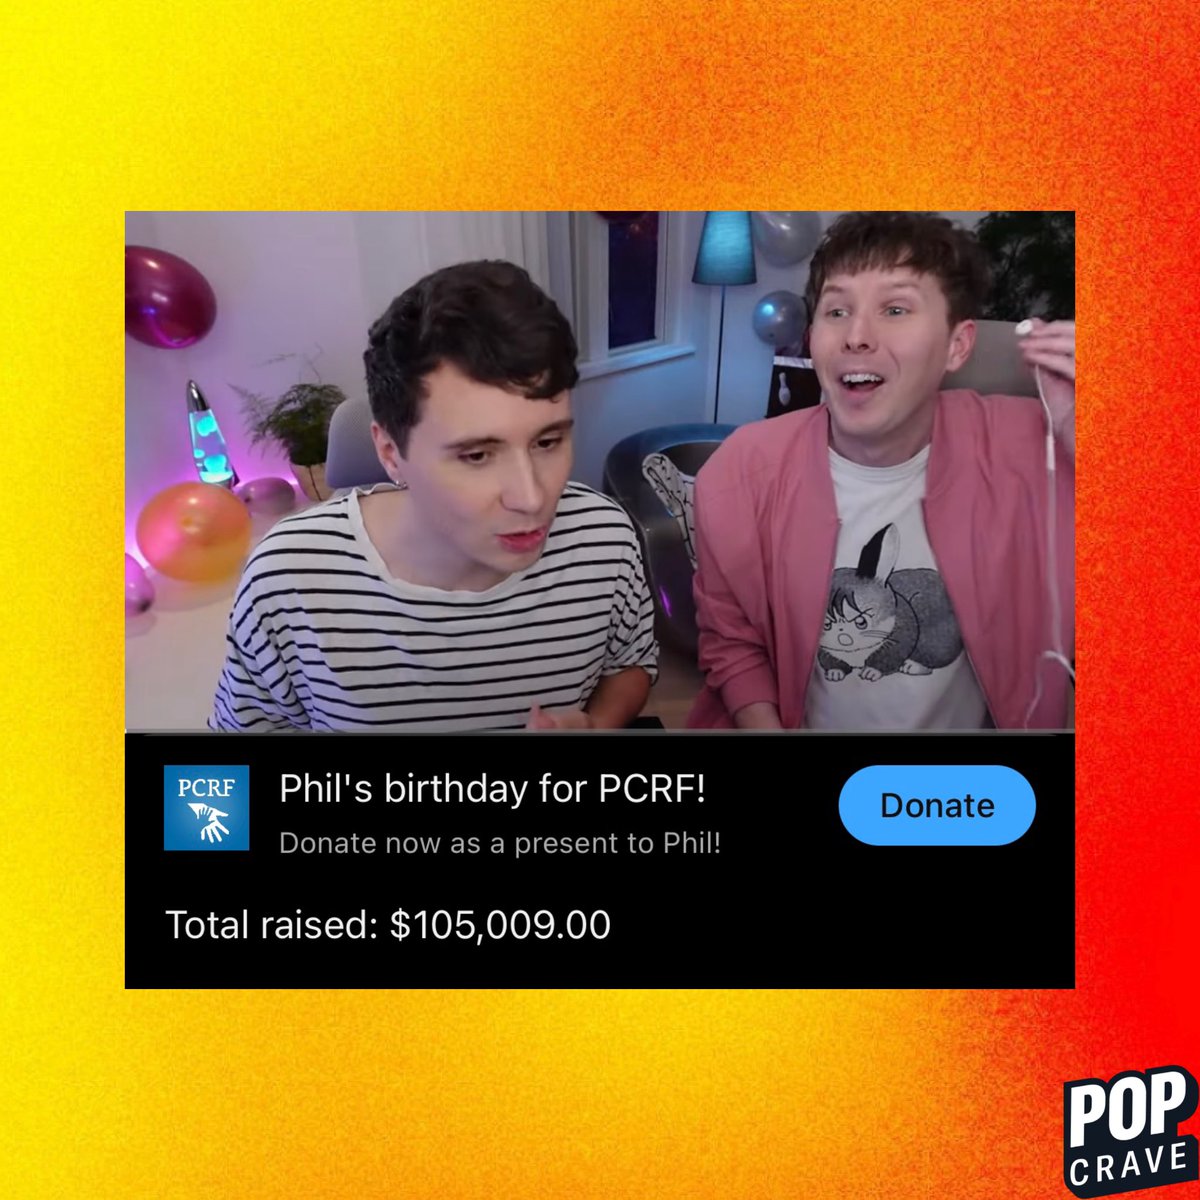 Dan and Phil’s livestream celebrating Phil’s birthday was able to raise over $100,000 for the Palestine Children’s Relief Fund.